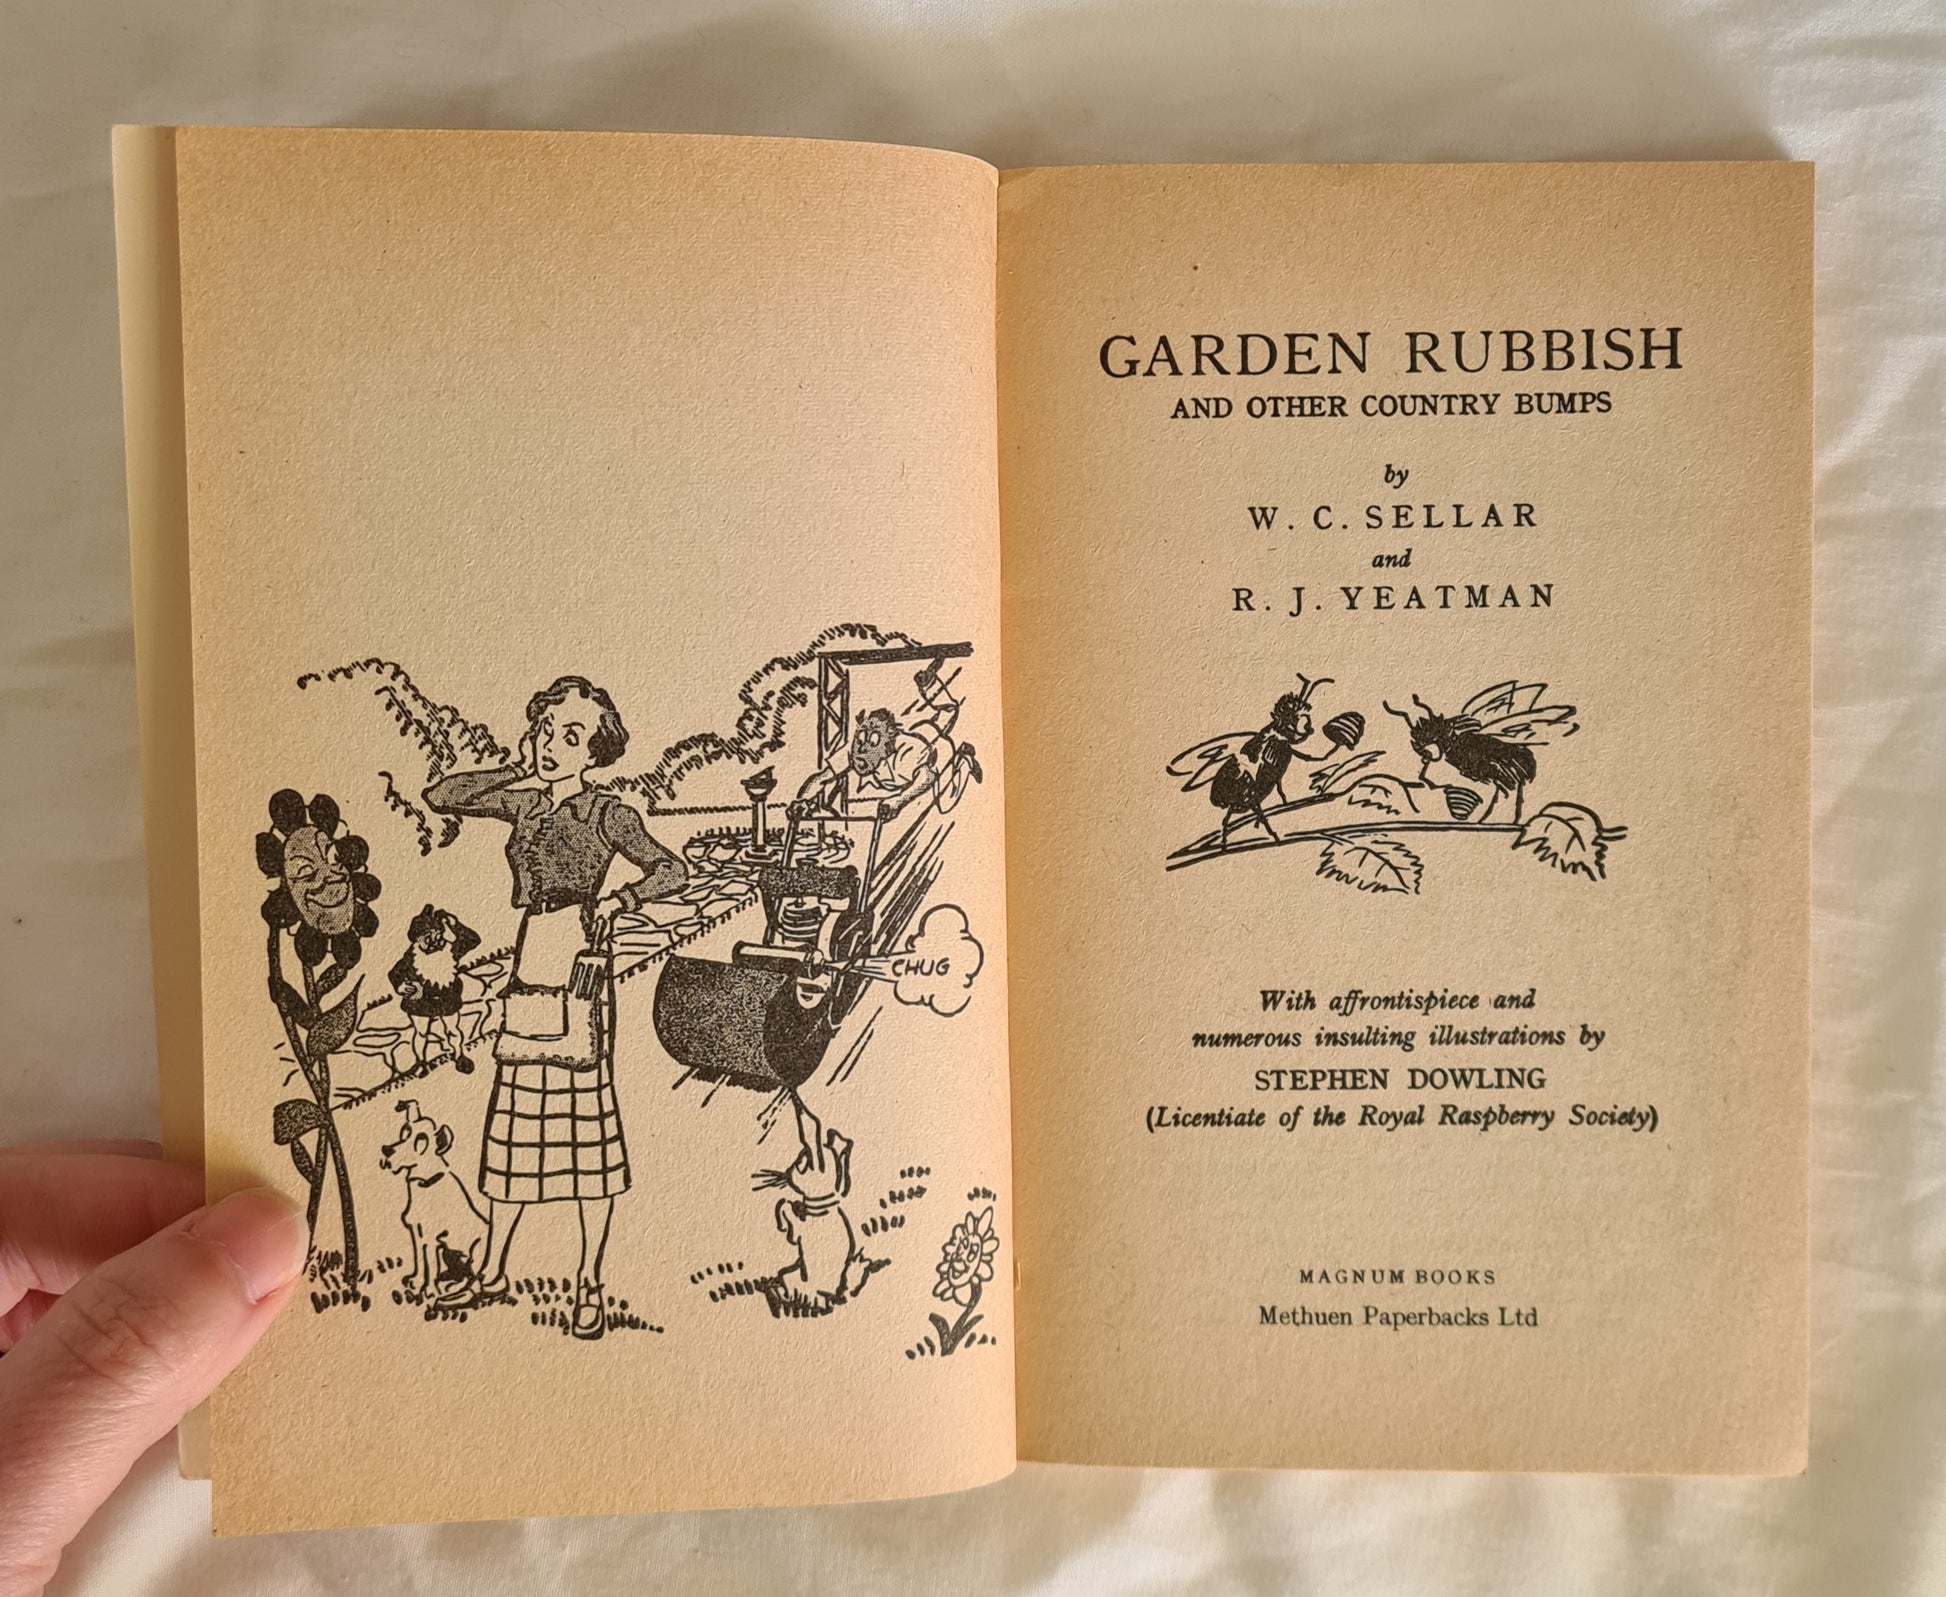 Garden Rubbish  And Other Country Bumps  by W. C. Sellar and R. J. Yeatman